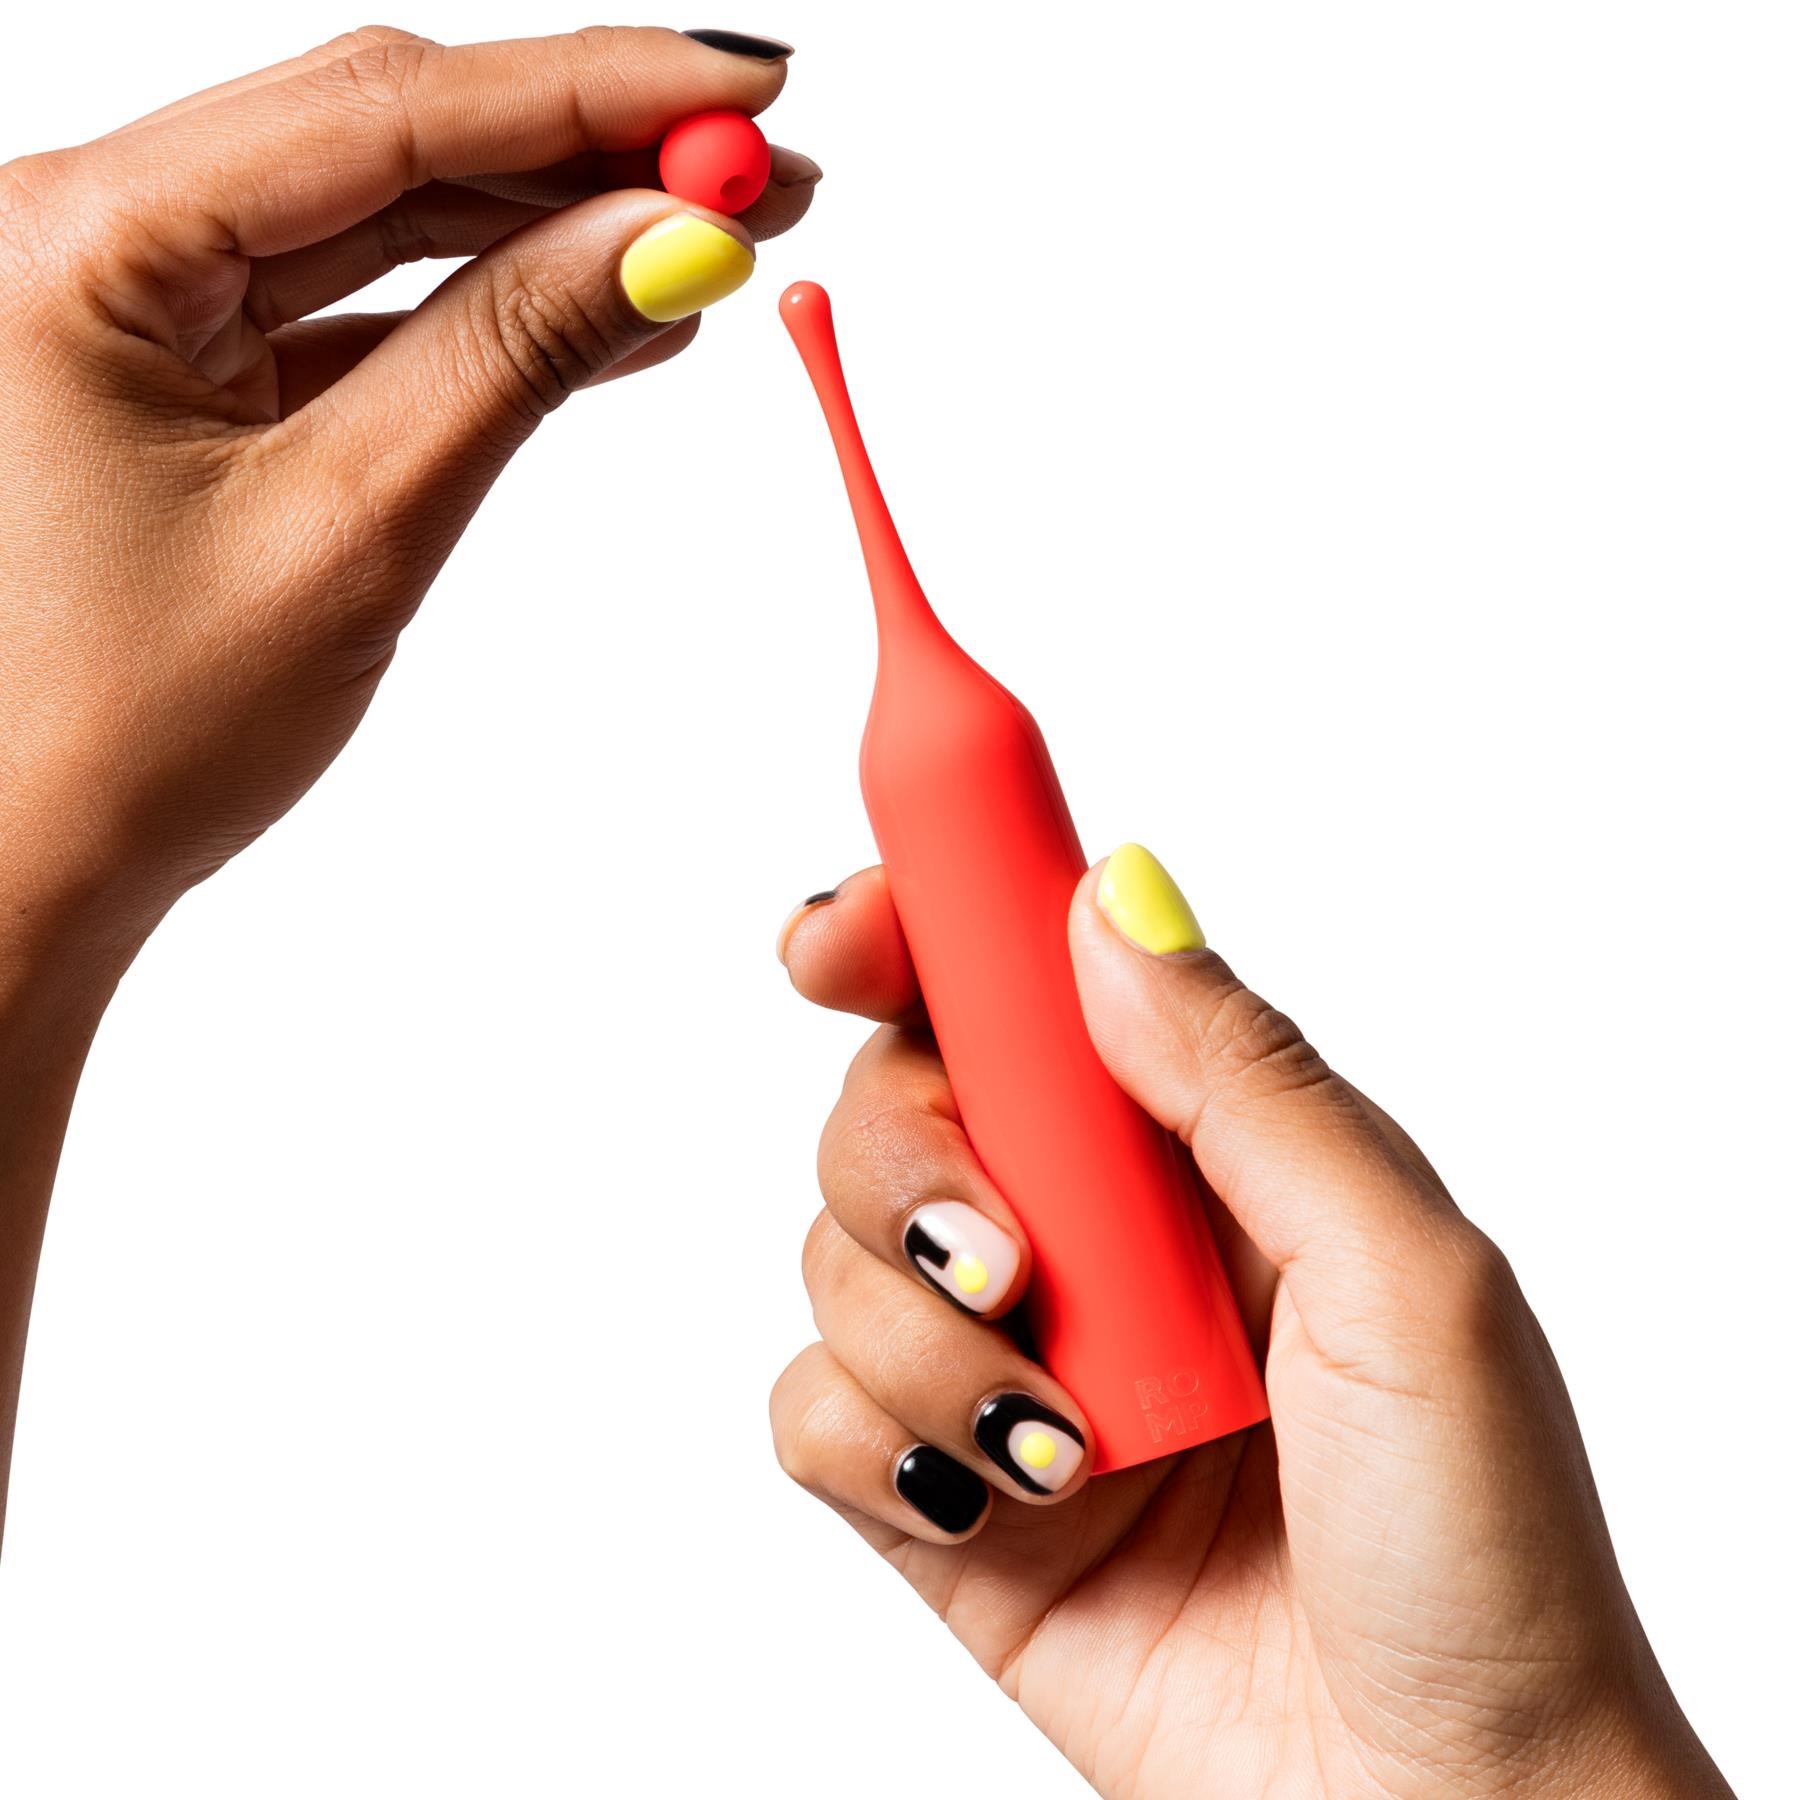 Romp Pop Clitoral Vibrator- Hand Shot to Show How Tip Is Placed